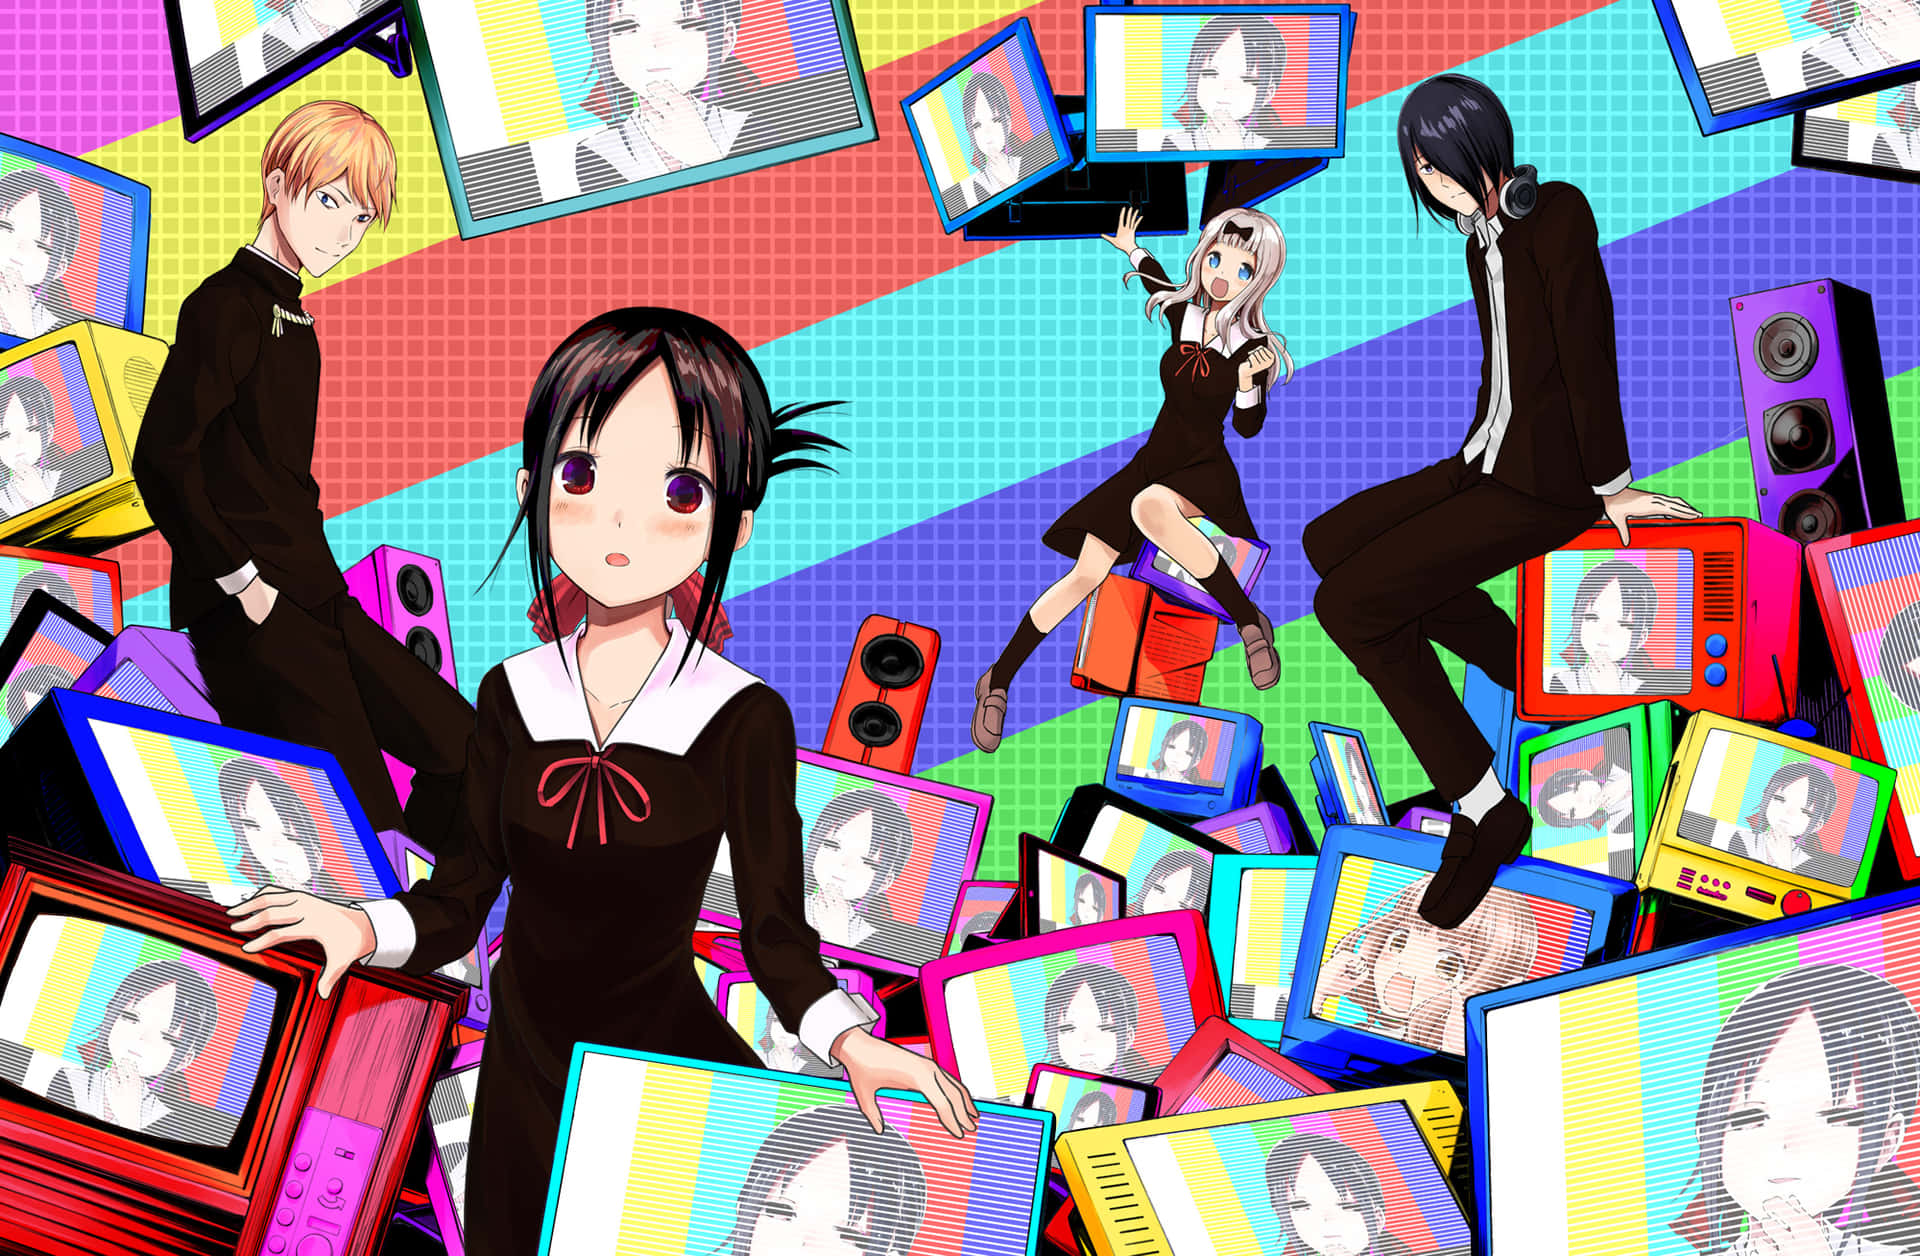 Kaguya and Shirogane are living the Love Is War Wallpaper